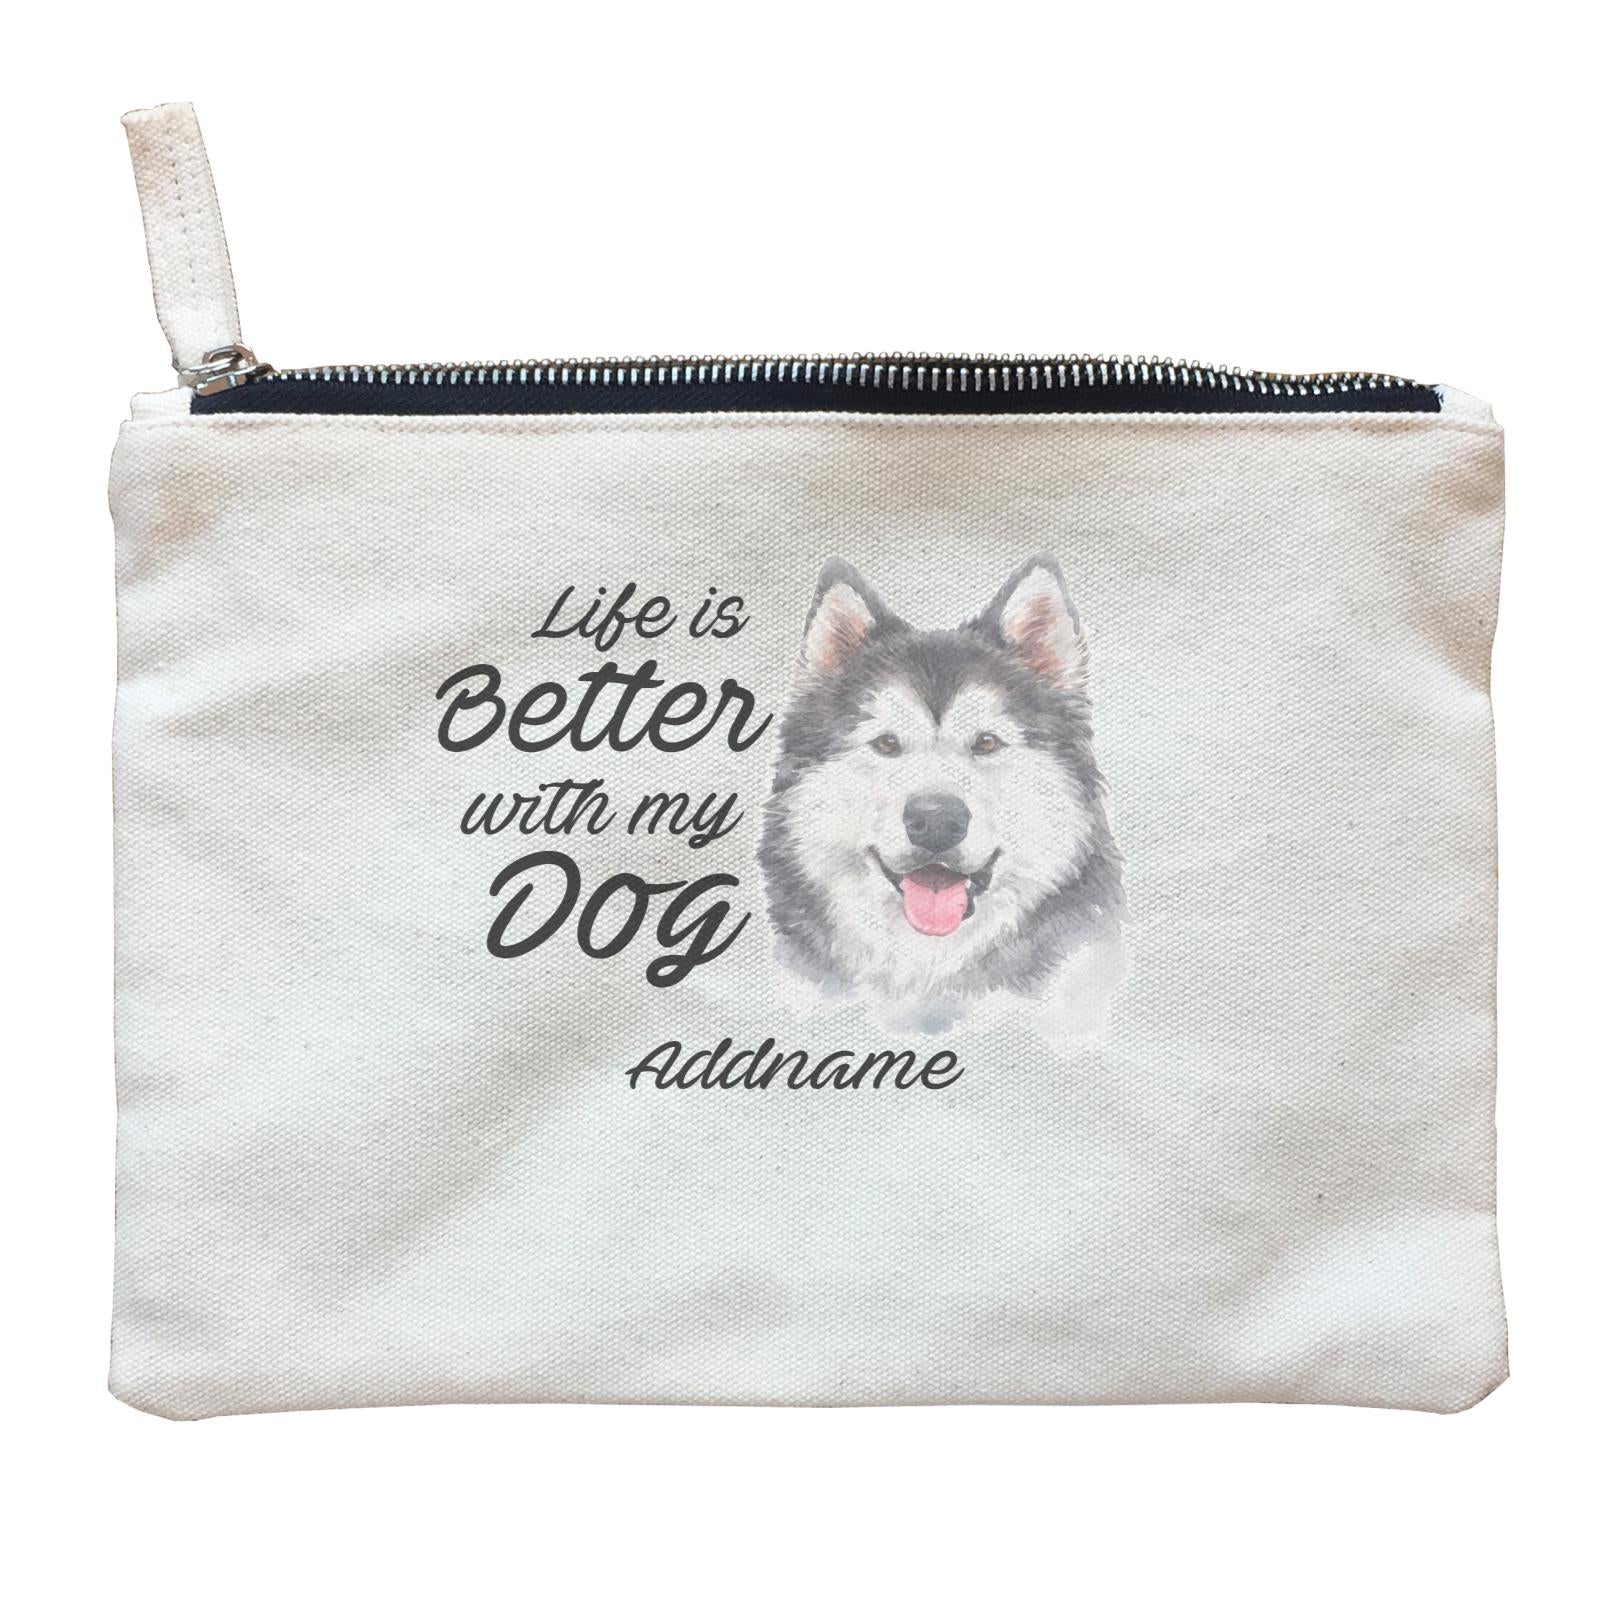 Watercolor Life is Better With My Dog Siberian Husky Smile Addname Zipper Pouch